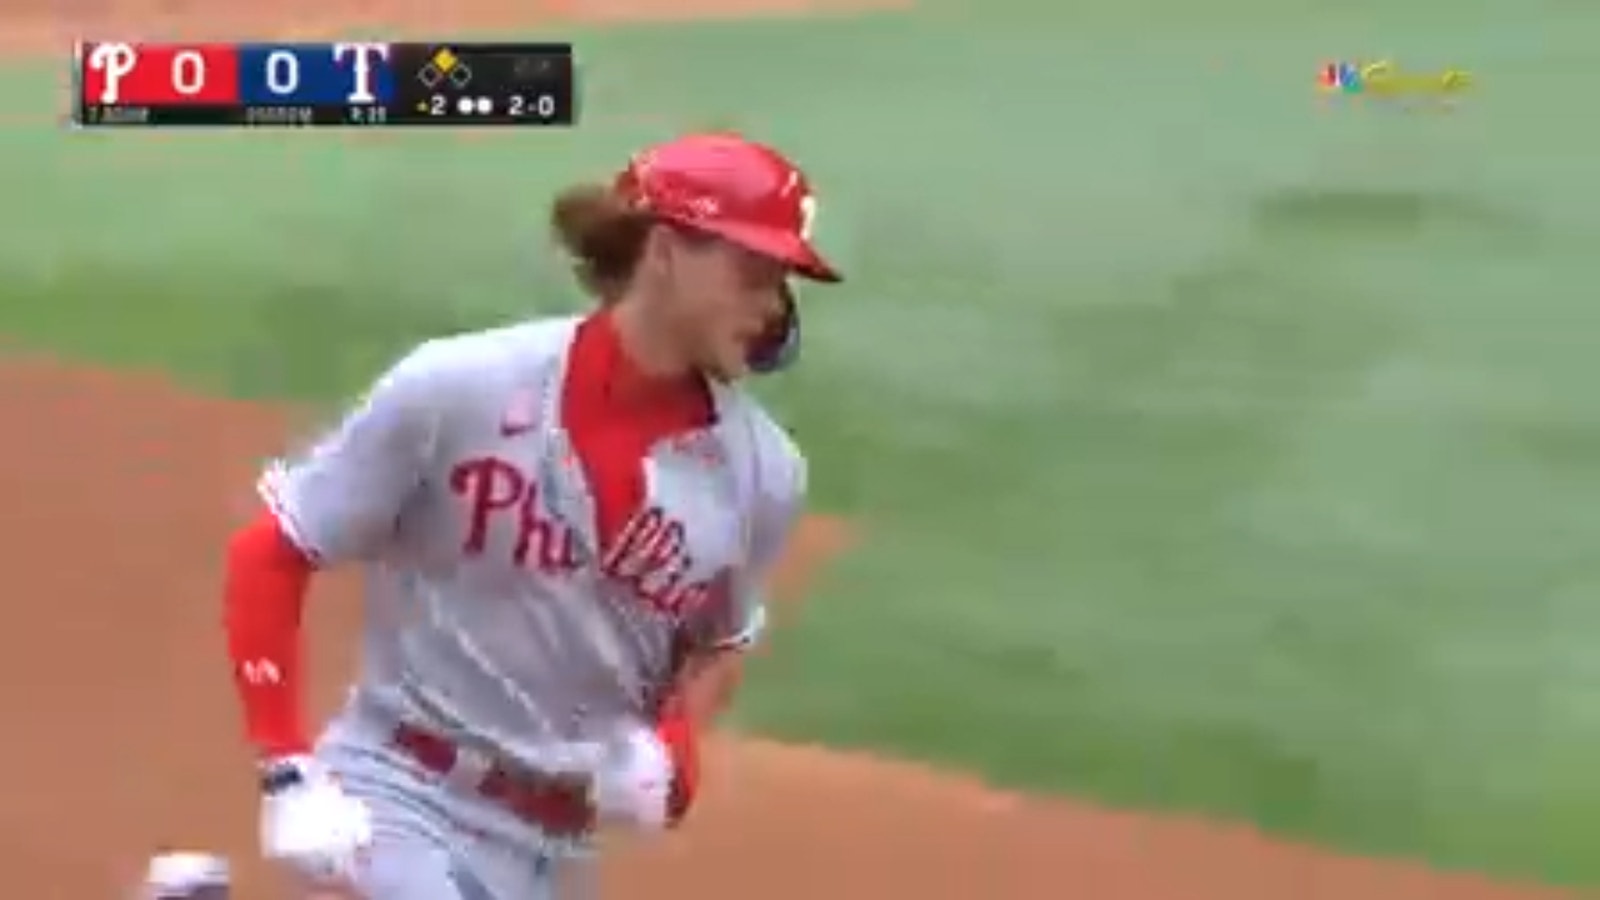 Alec Bohm crushes a two-run home run to give the Phillies an early lead over the Rangers